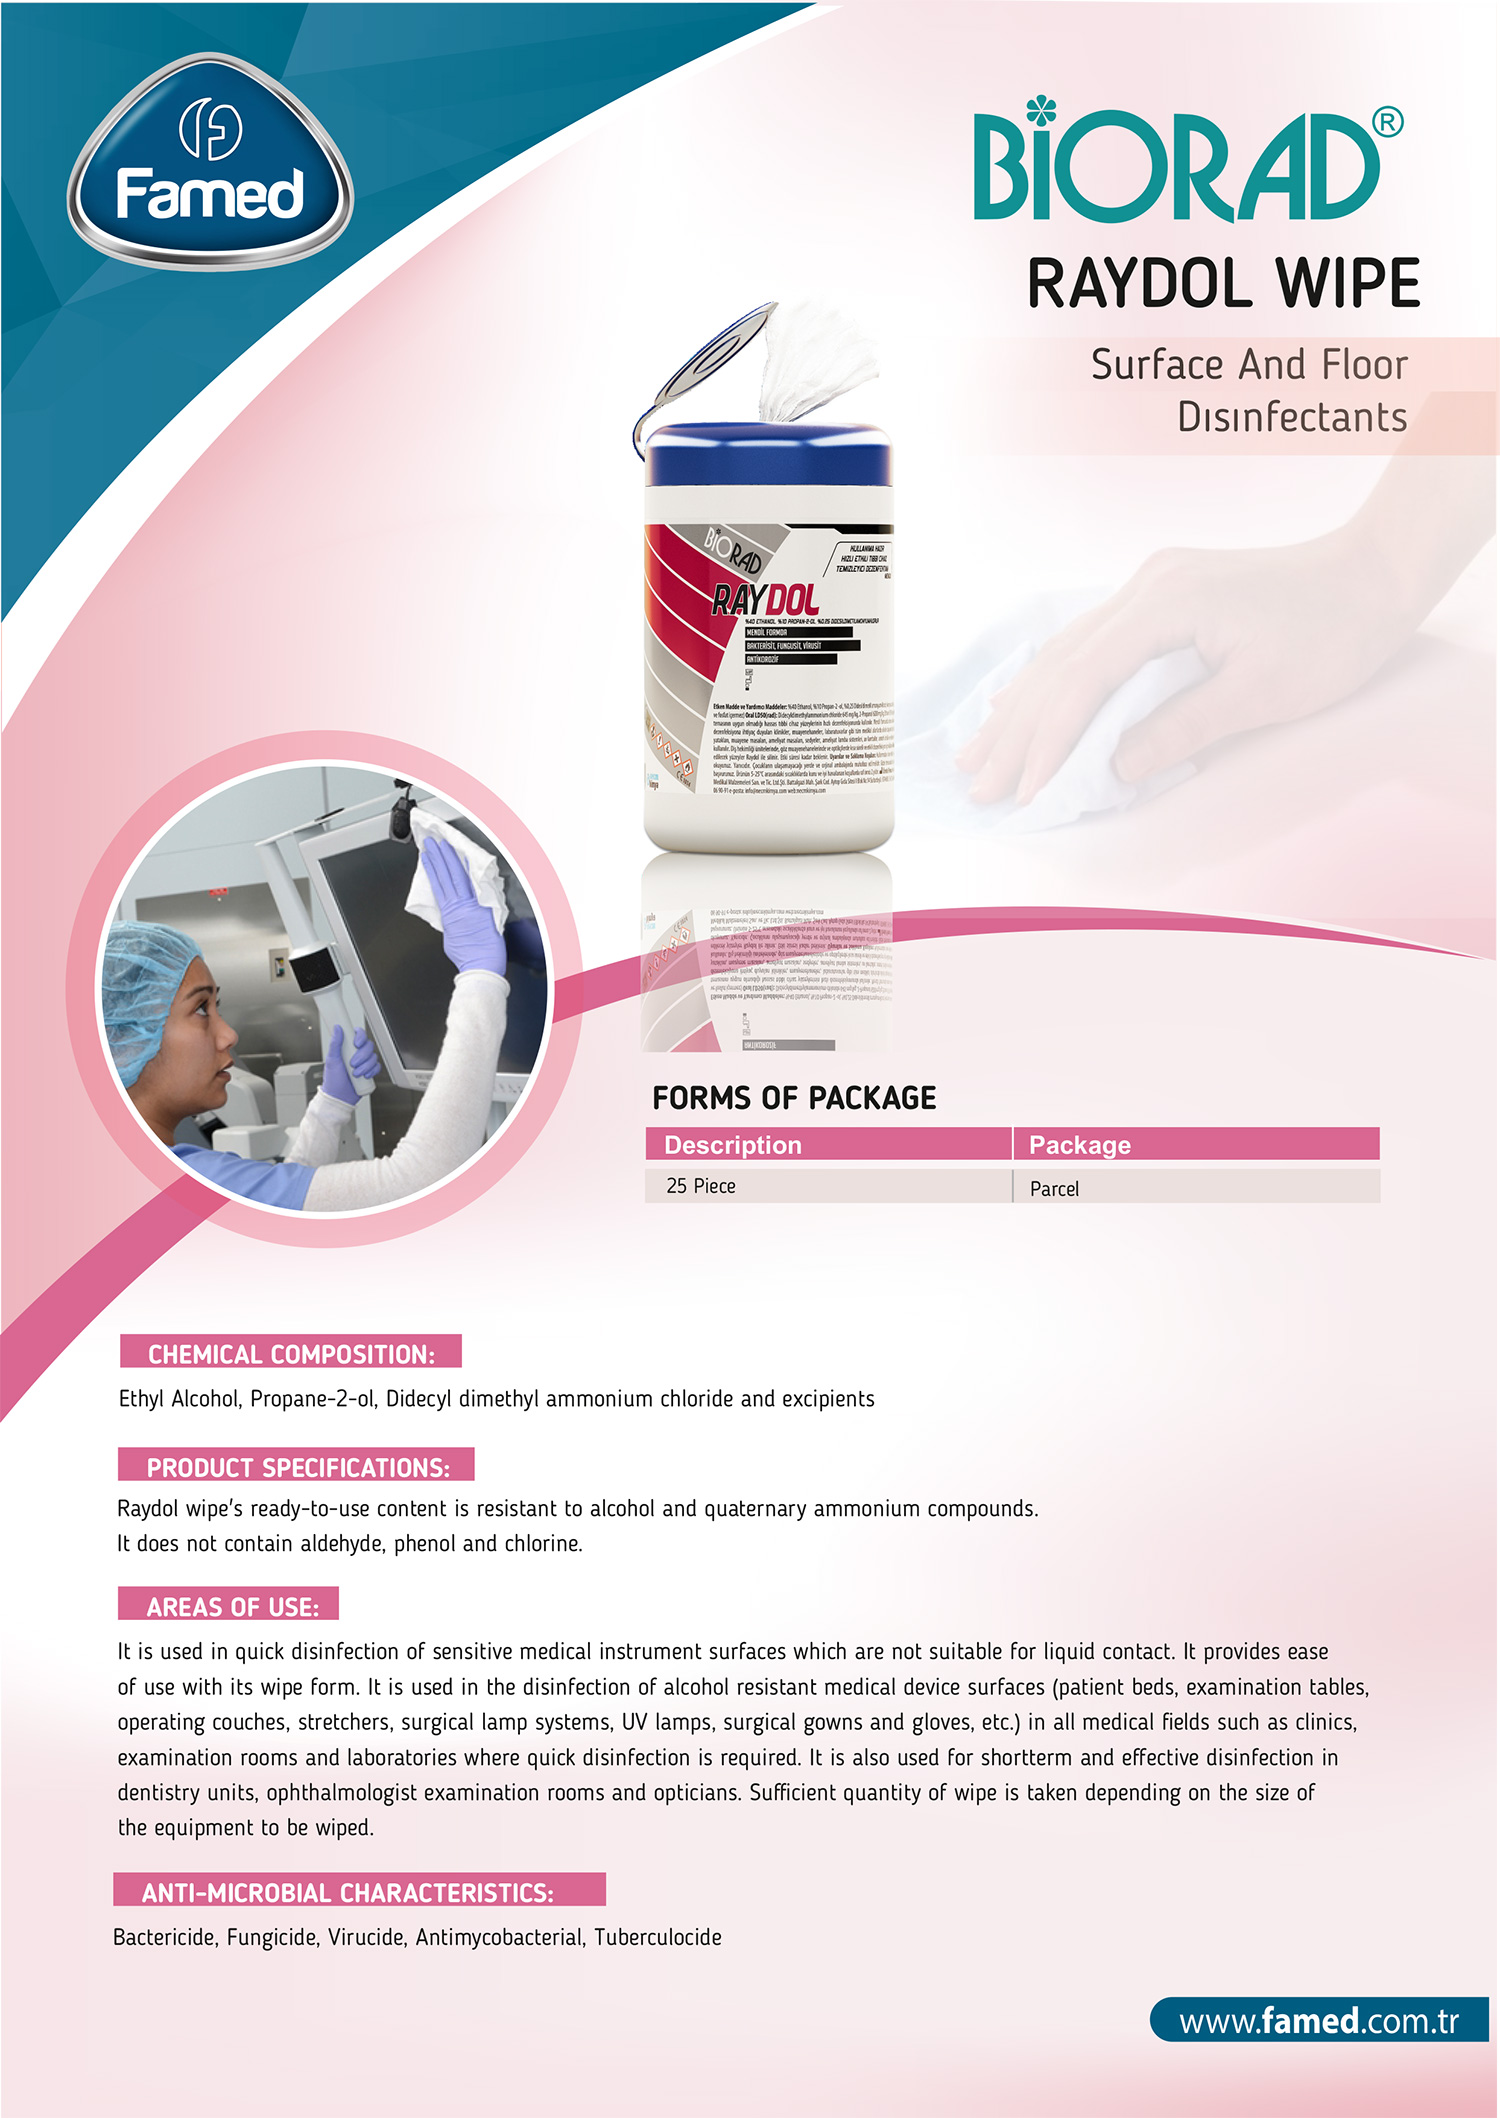 Raydol Wipe Surface And Floor Disinfectants